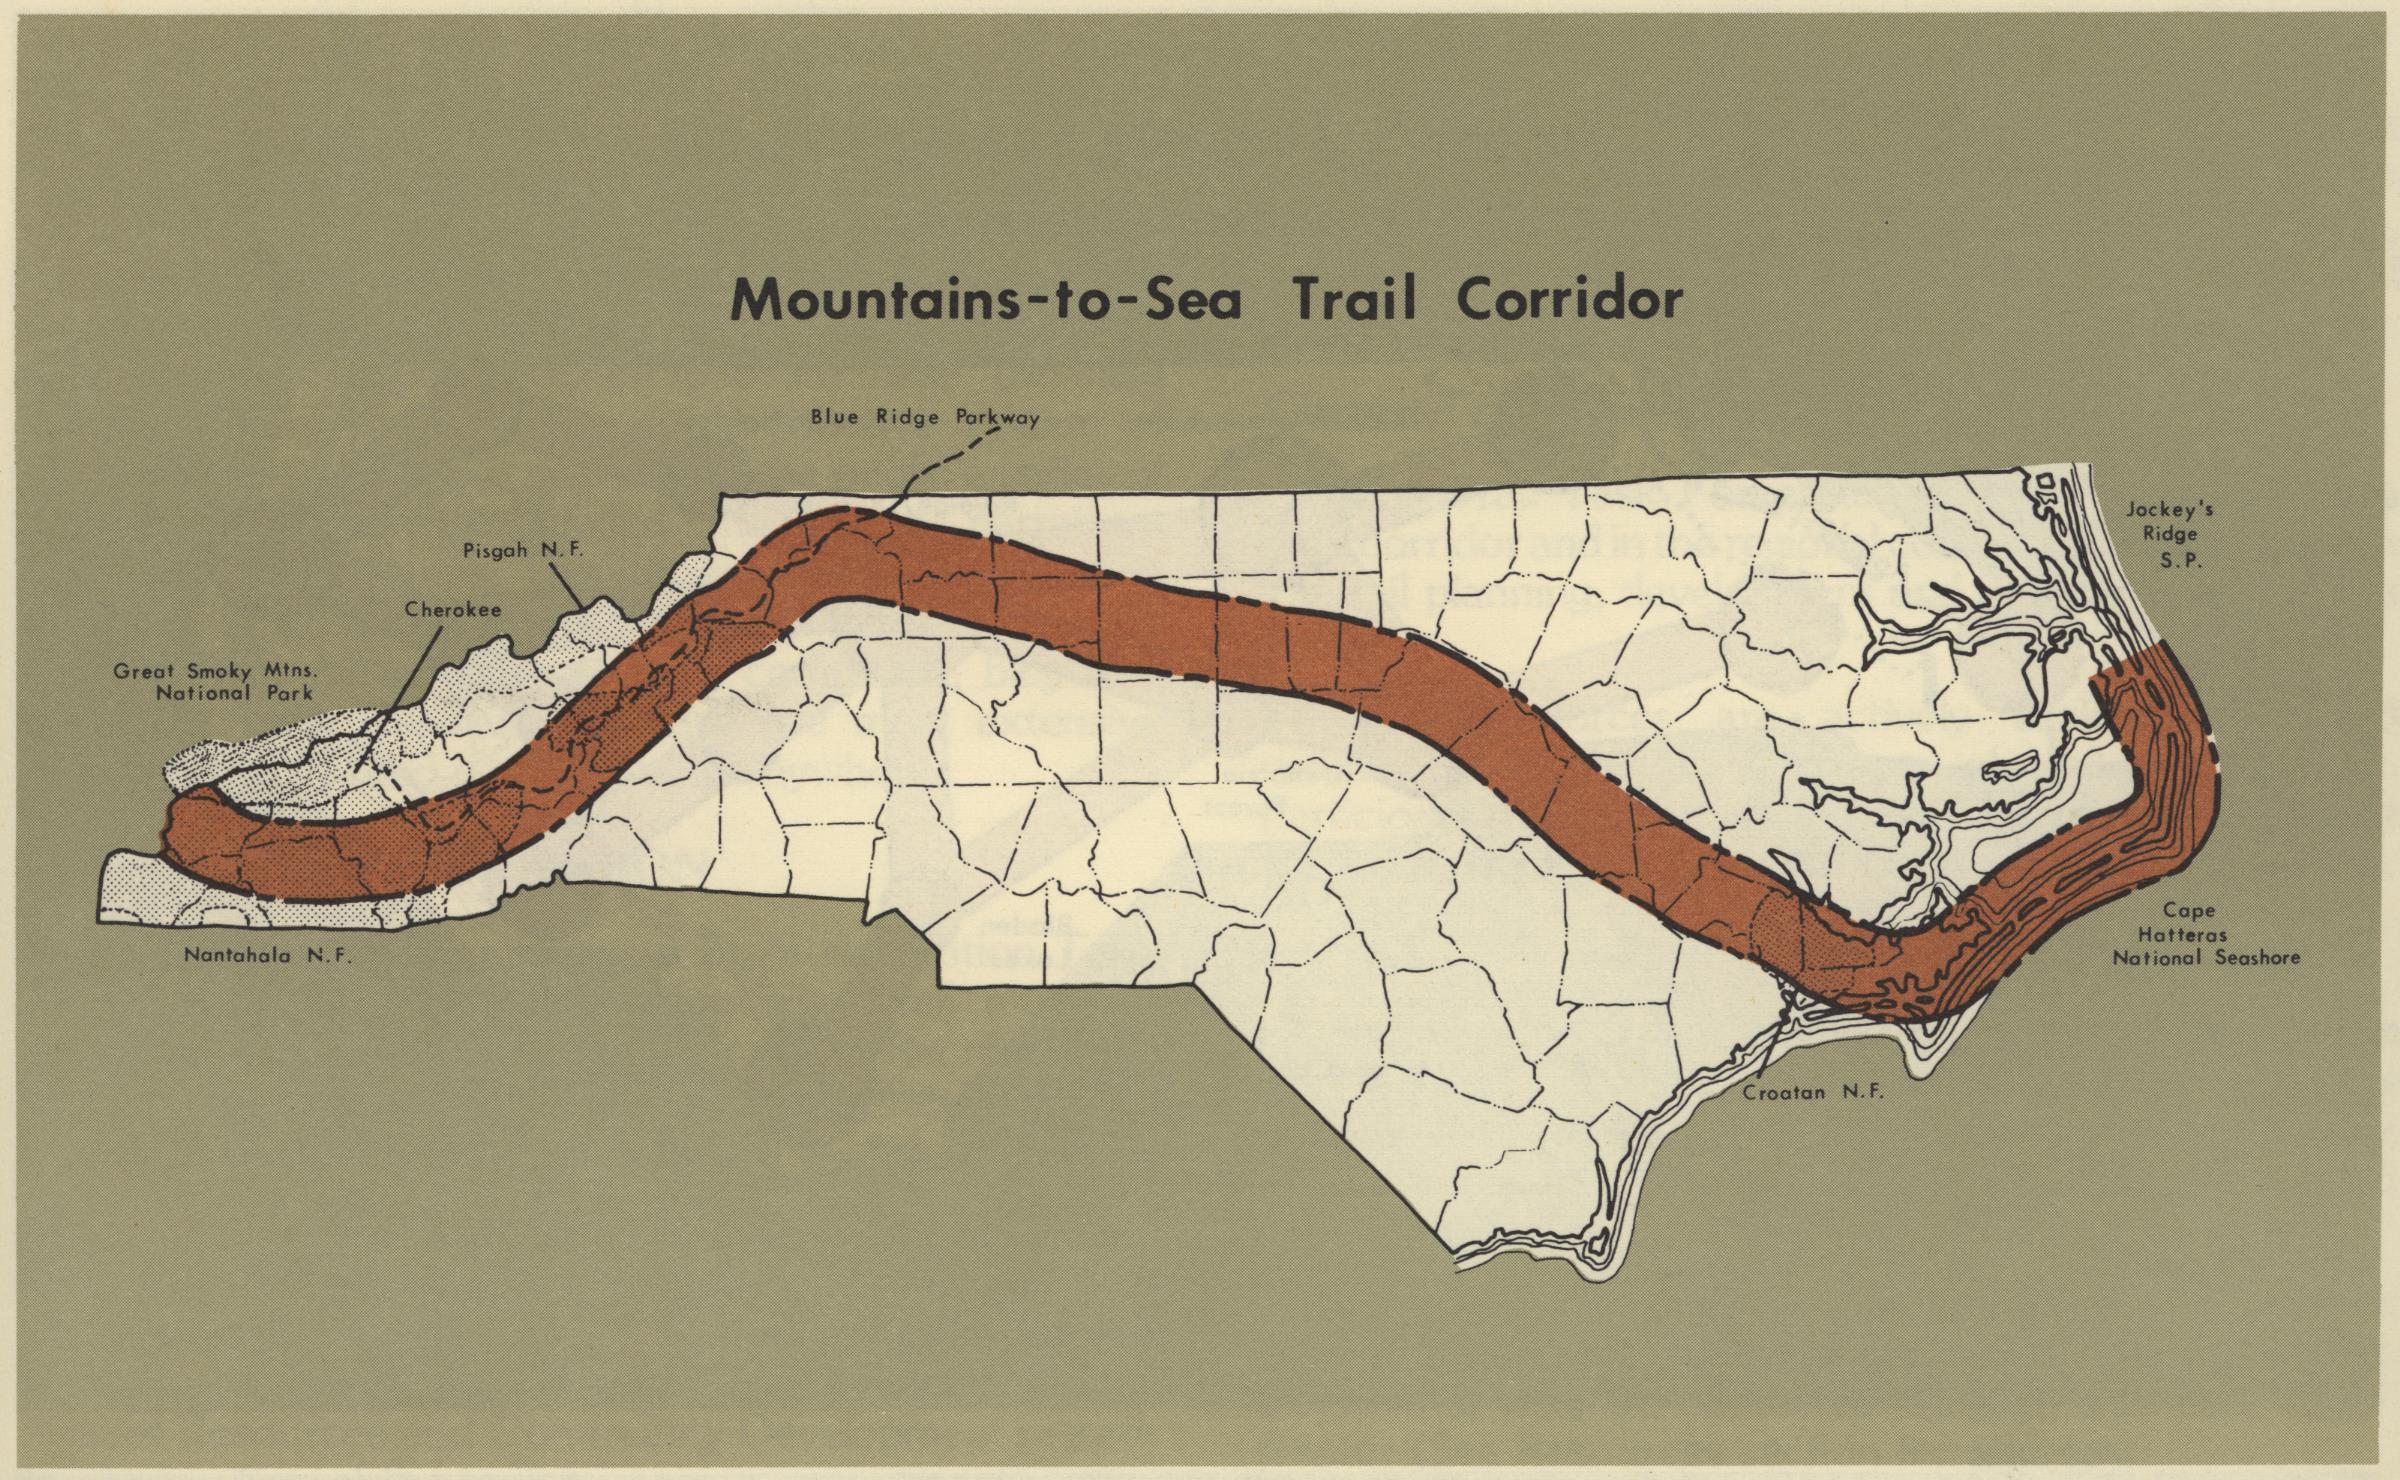 A map depicting the Mountains-to-Sea Trail Corridor in North Carolina.